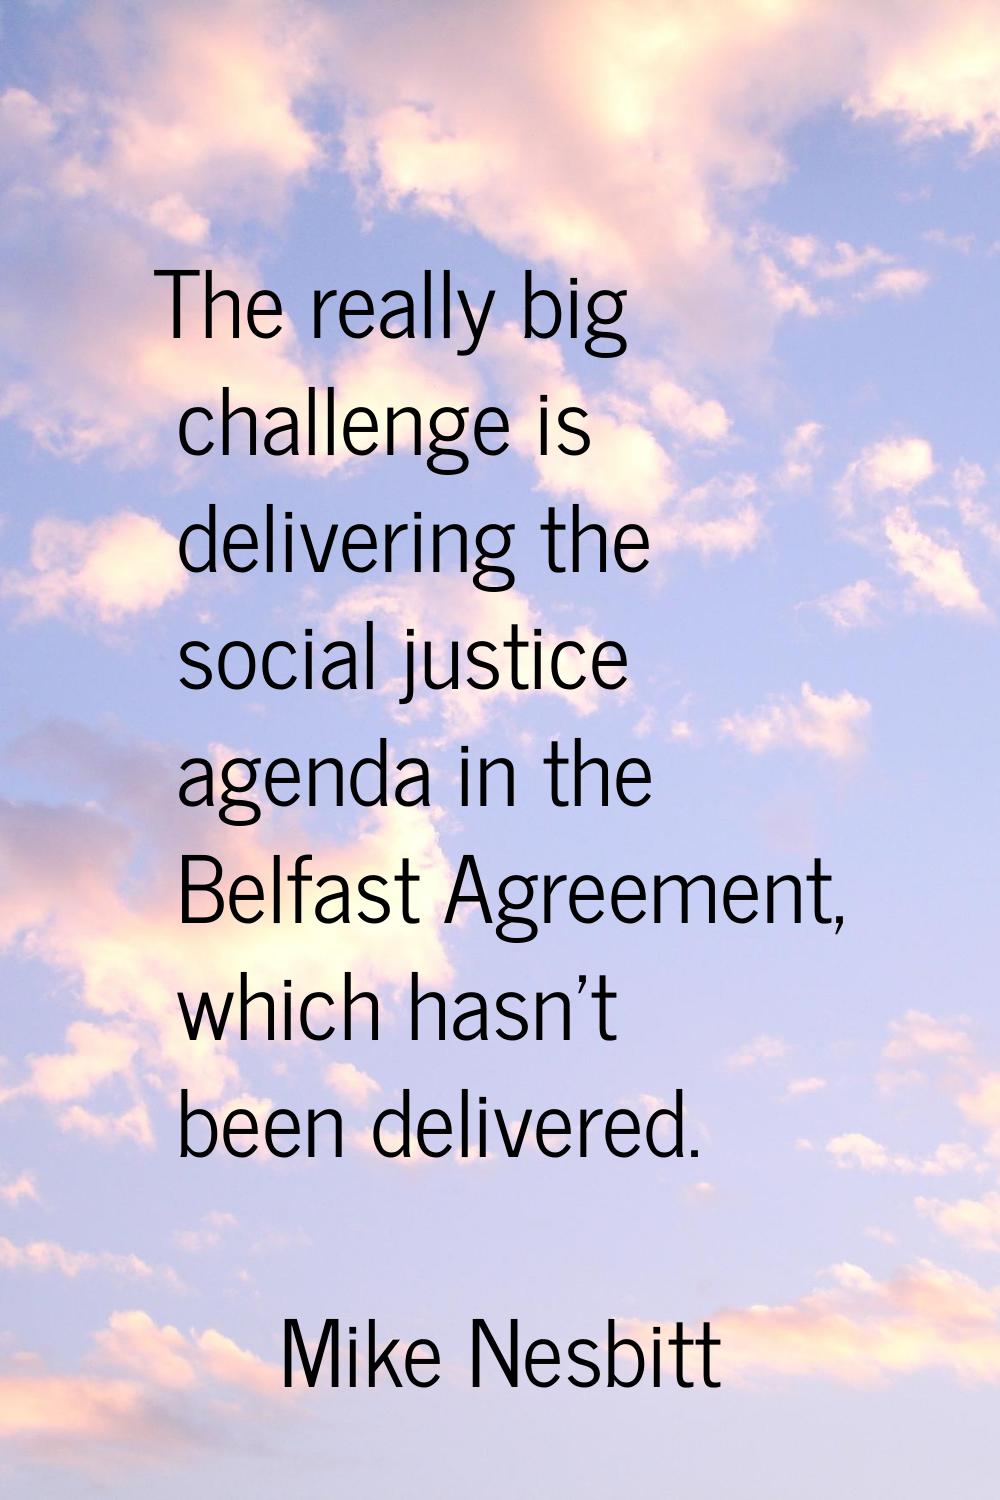 The really big challenge is delivering the social justice agenda in the Belfast Agreement, which ha